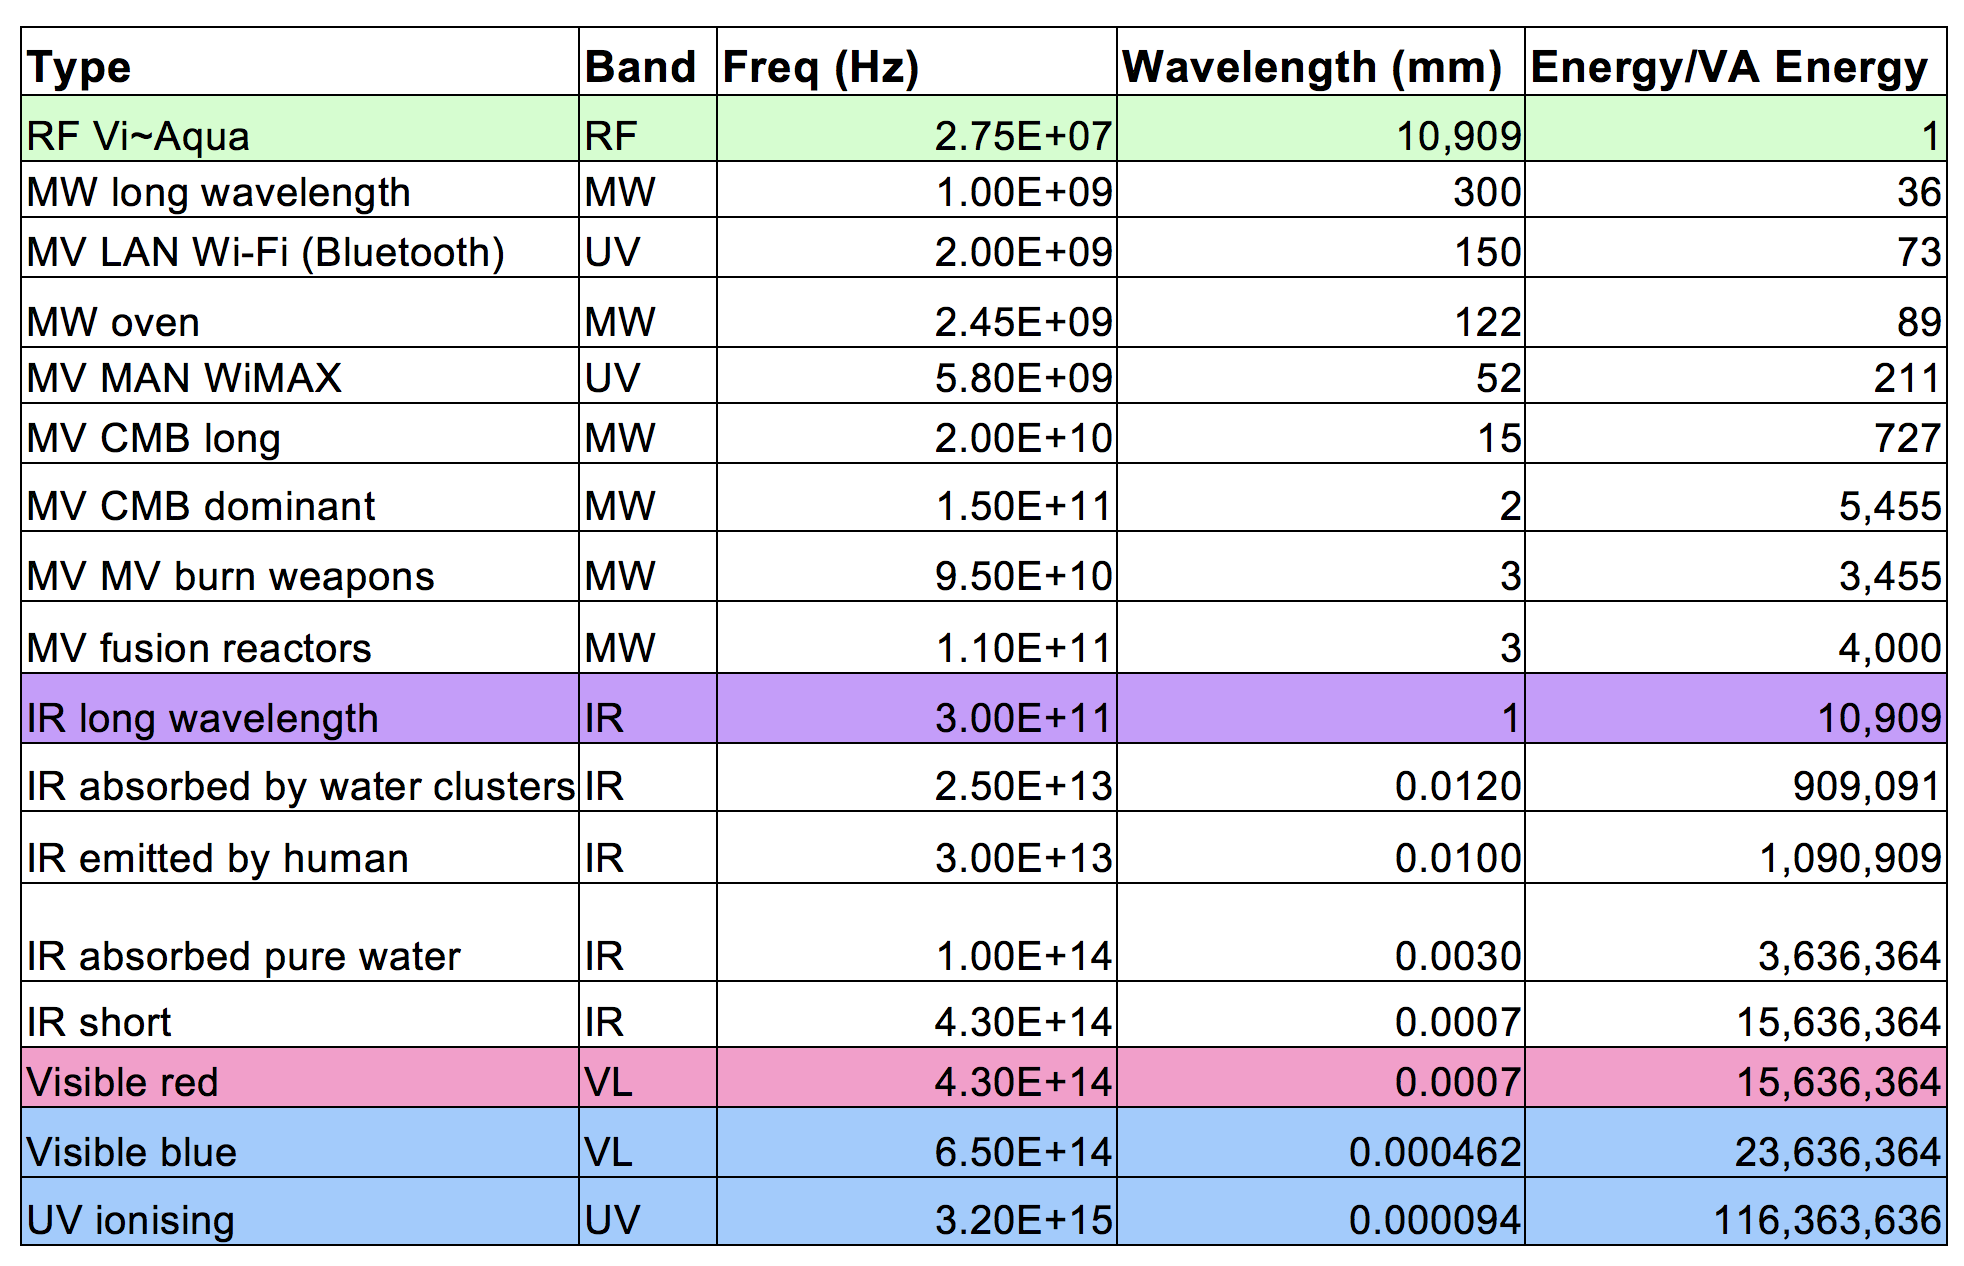 Table 16. Frequencies, wavelengths and energies for typical EM radiation. This illustrates typical energies of EM radiation in various bands, for comparison with the RF radiation in the experiment.